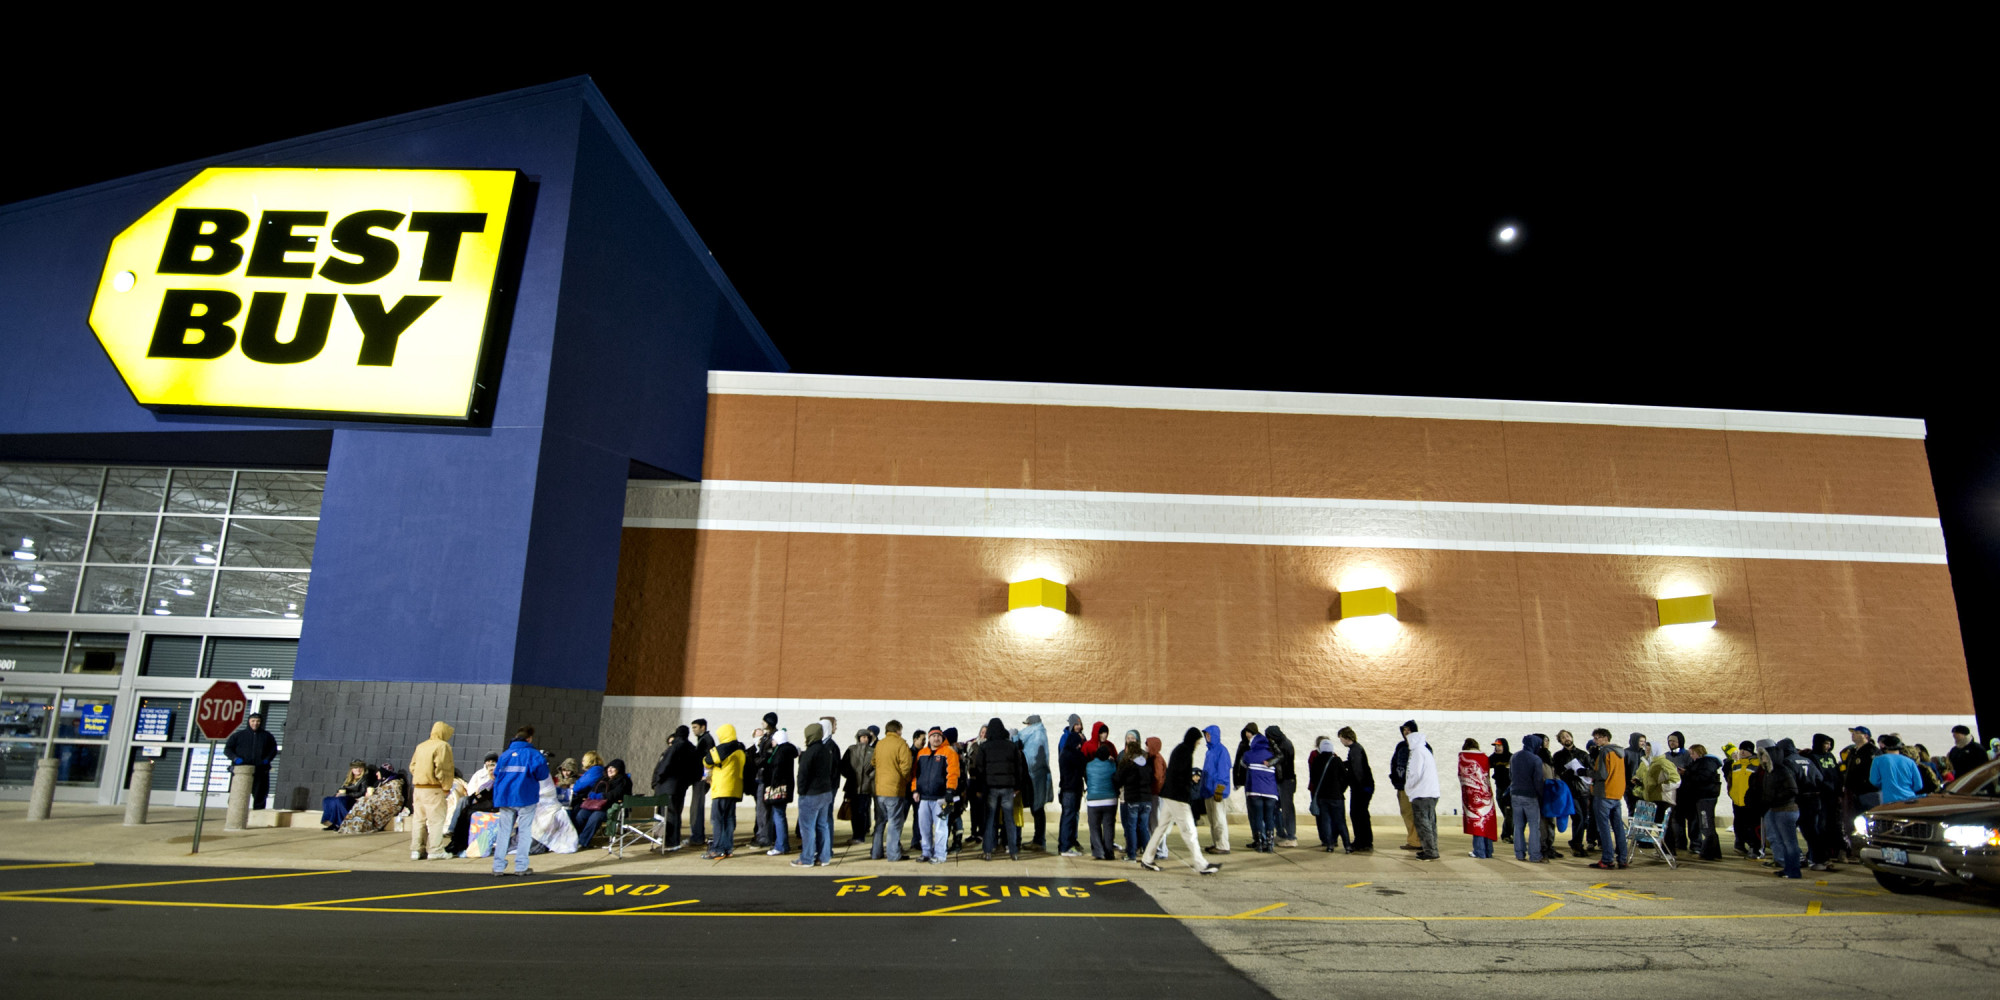 Best Buy Canada Black Friday Sale Times & Information | Canadian - What Ti.come Does Best Buy Open For Black Friday